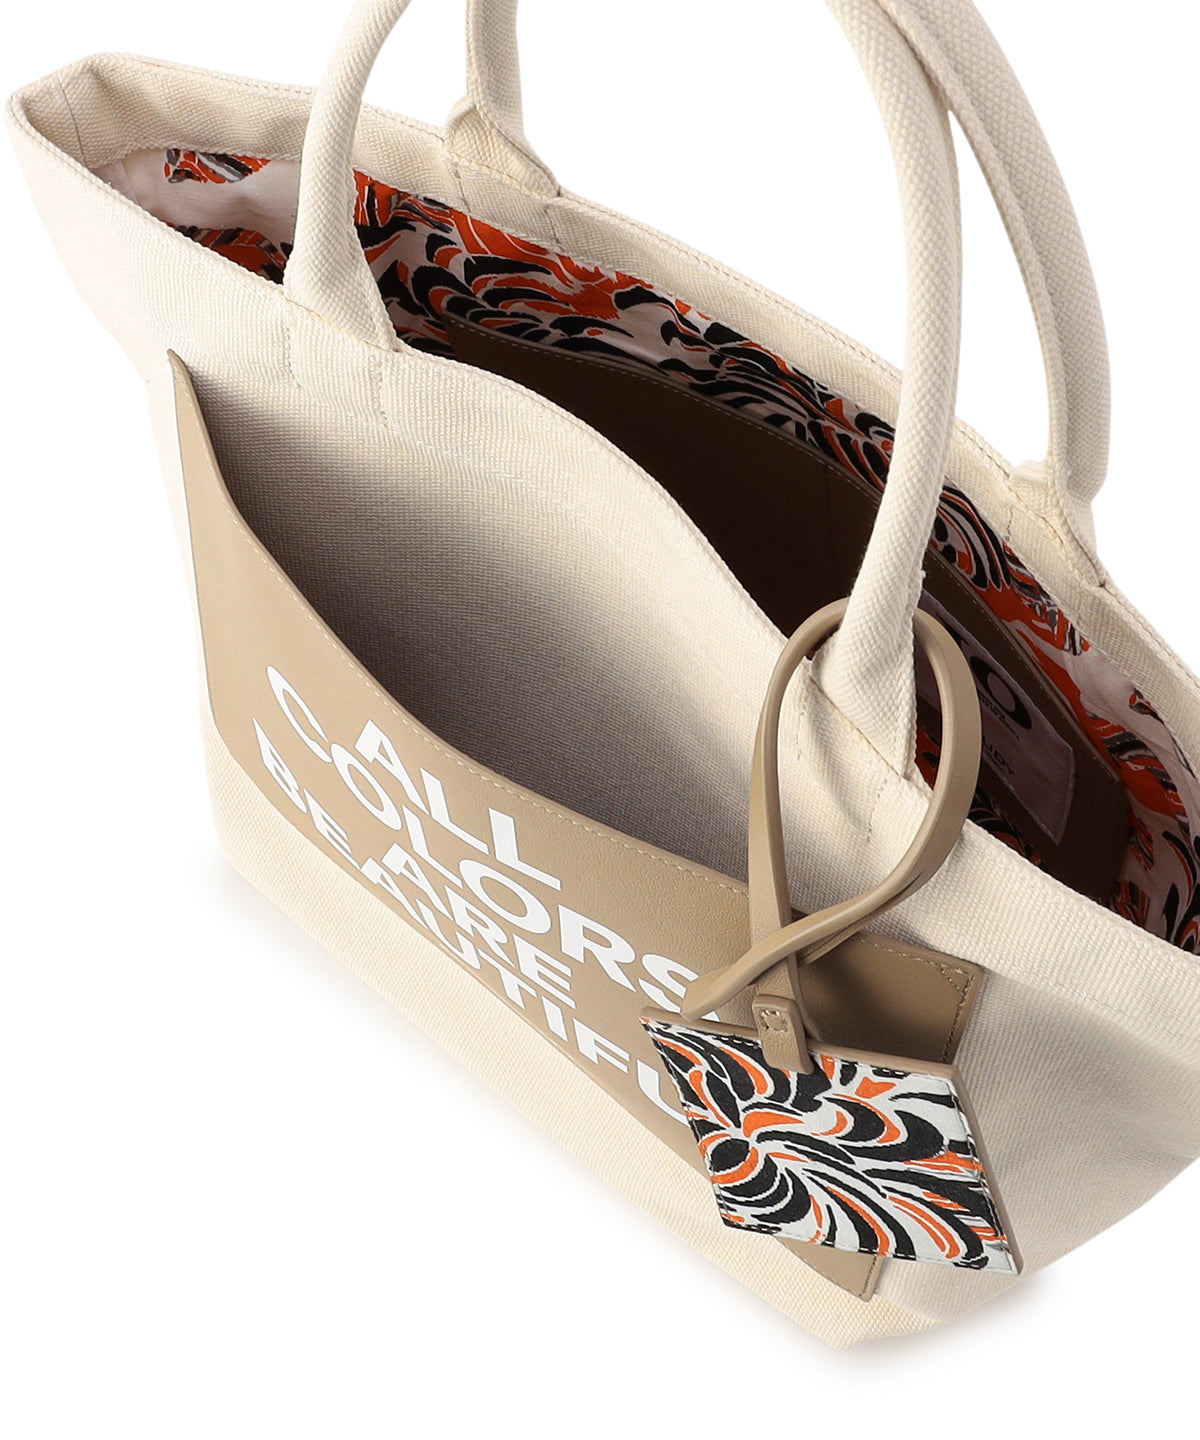 Recycled Canvas Tote (Medium) GREIGE